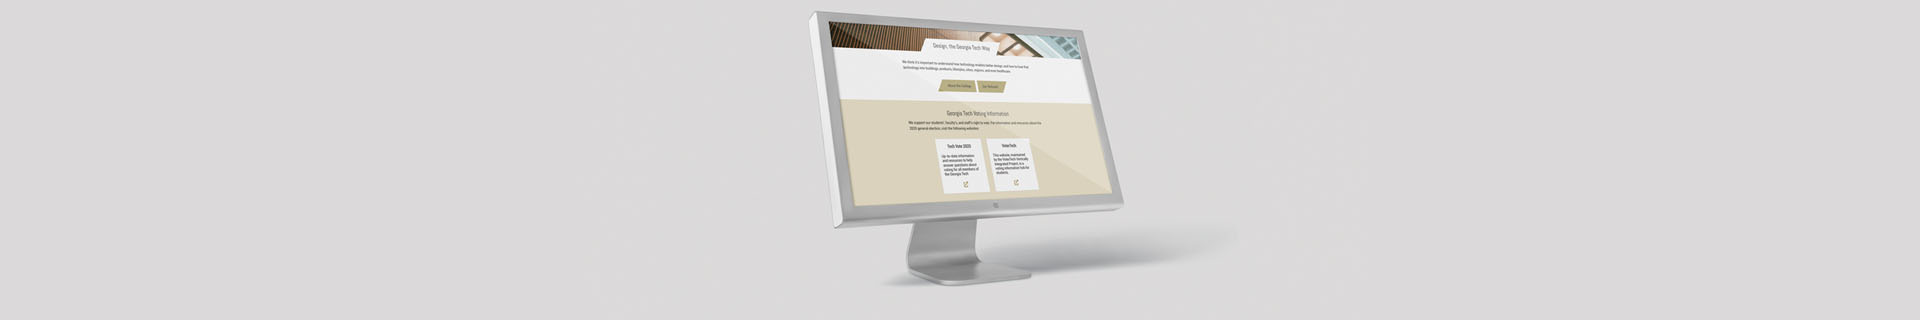 A desktop computer with the College of Design website homepage displayed.